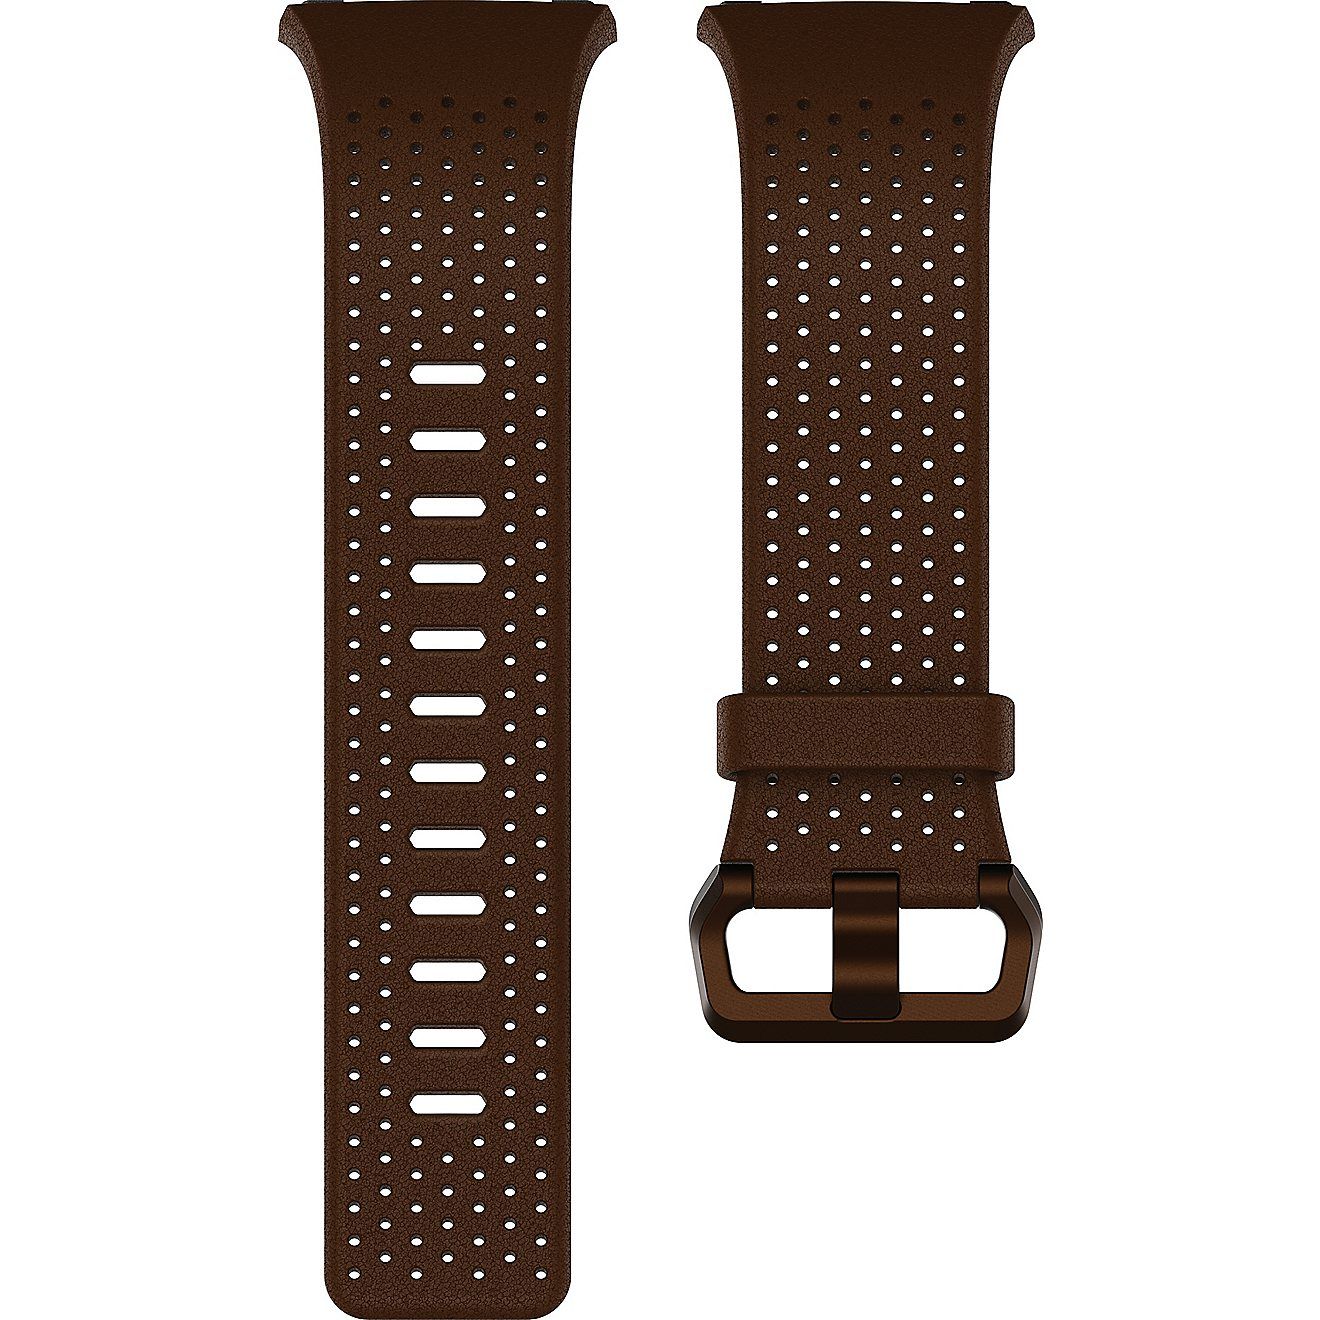 Fitbit Ionic Horween Leather Accessory Band | Academy Sports + Outdoor Affiliate